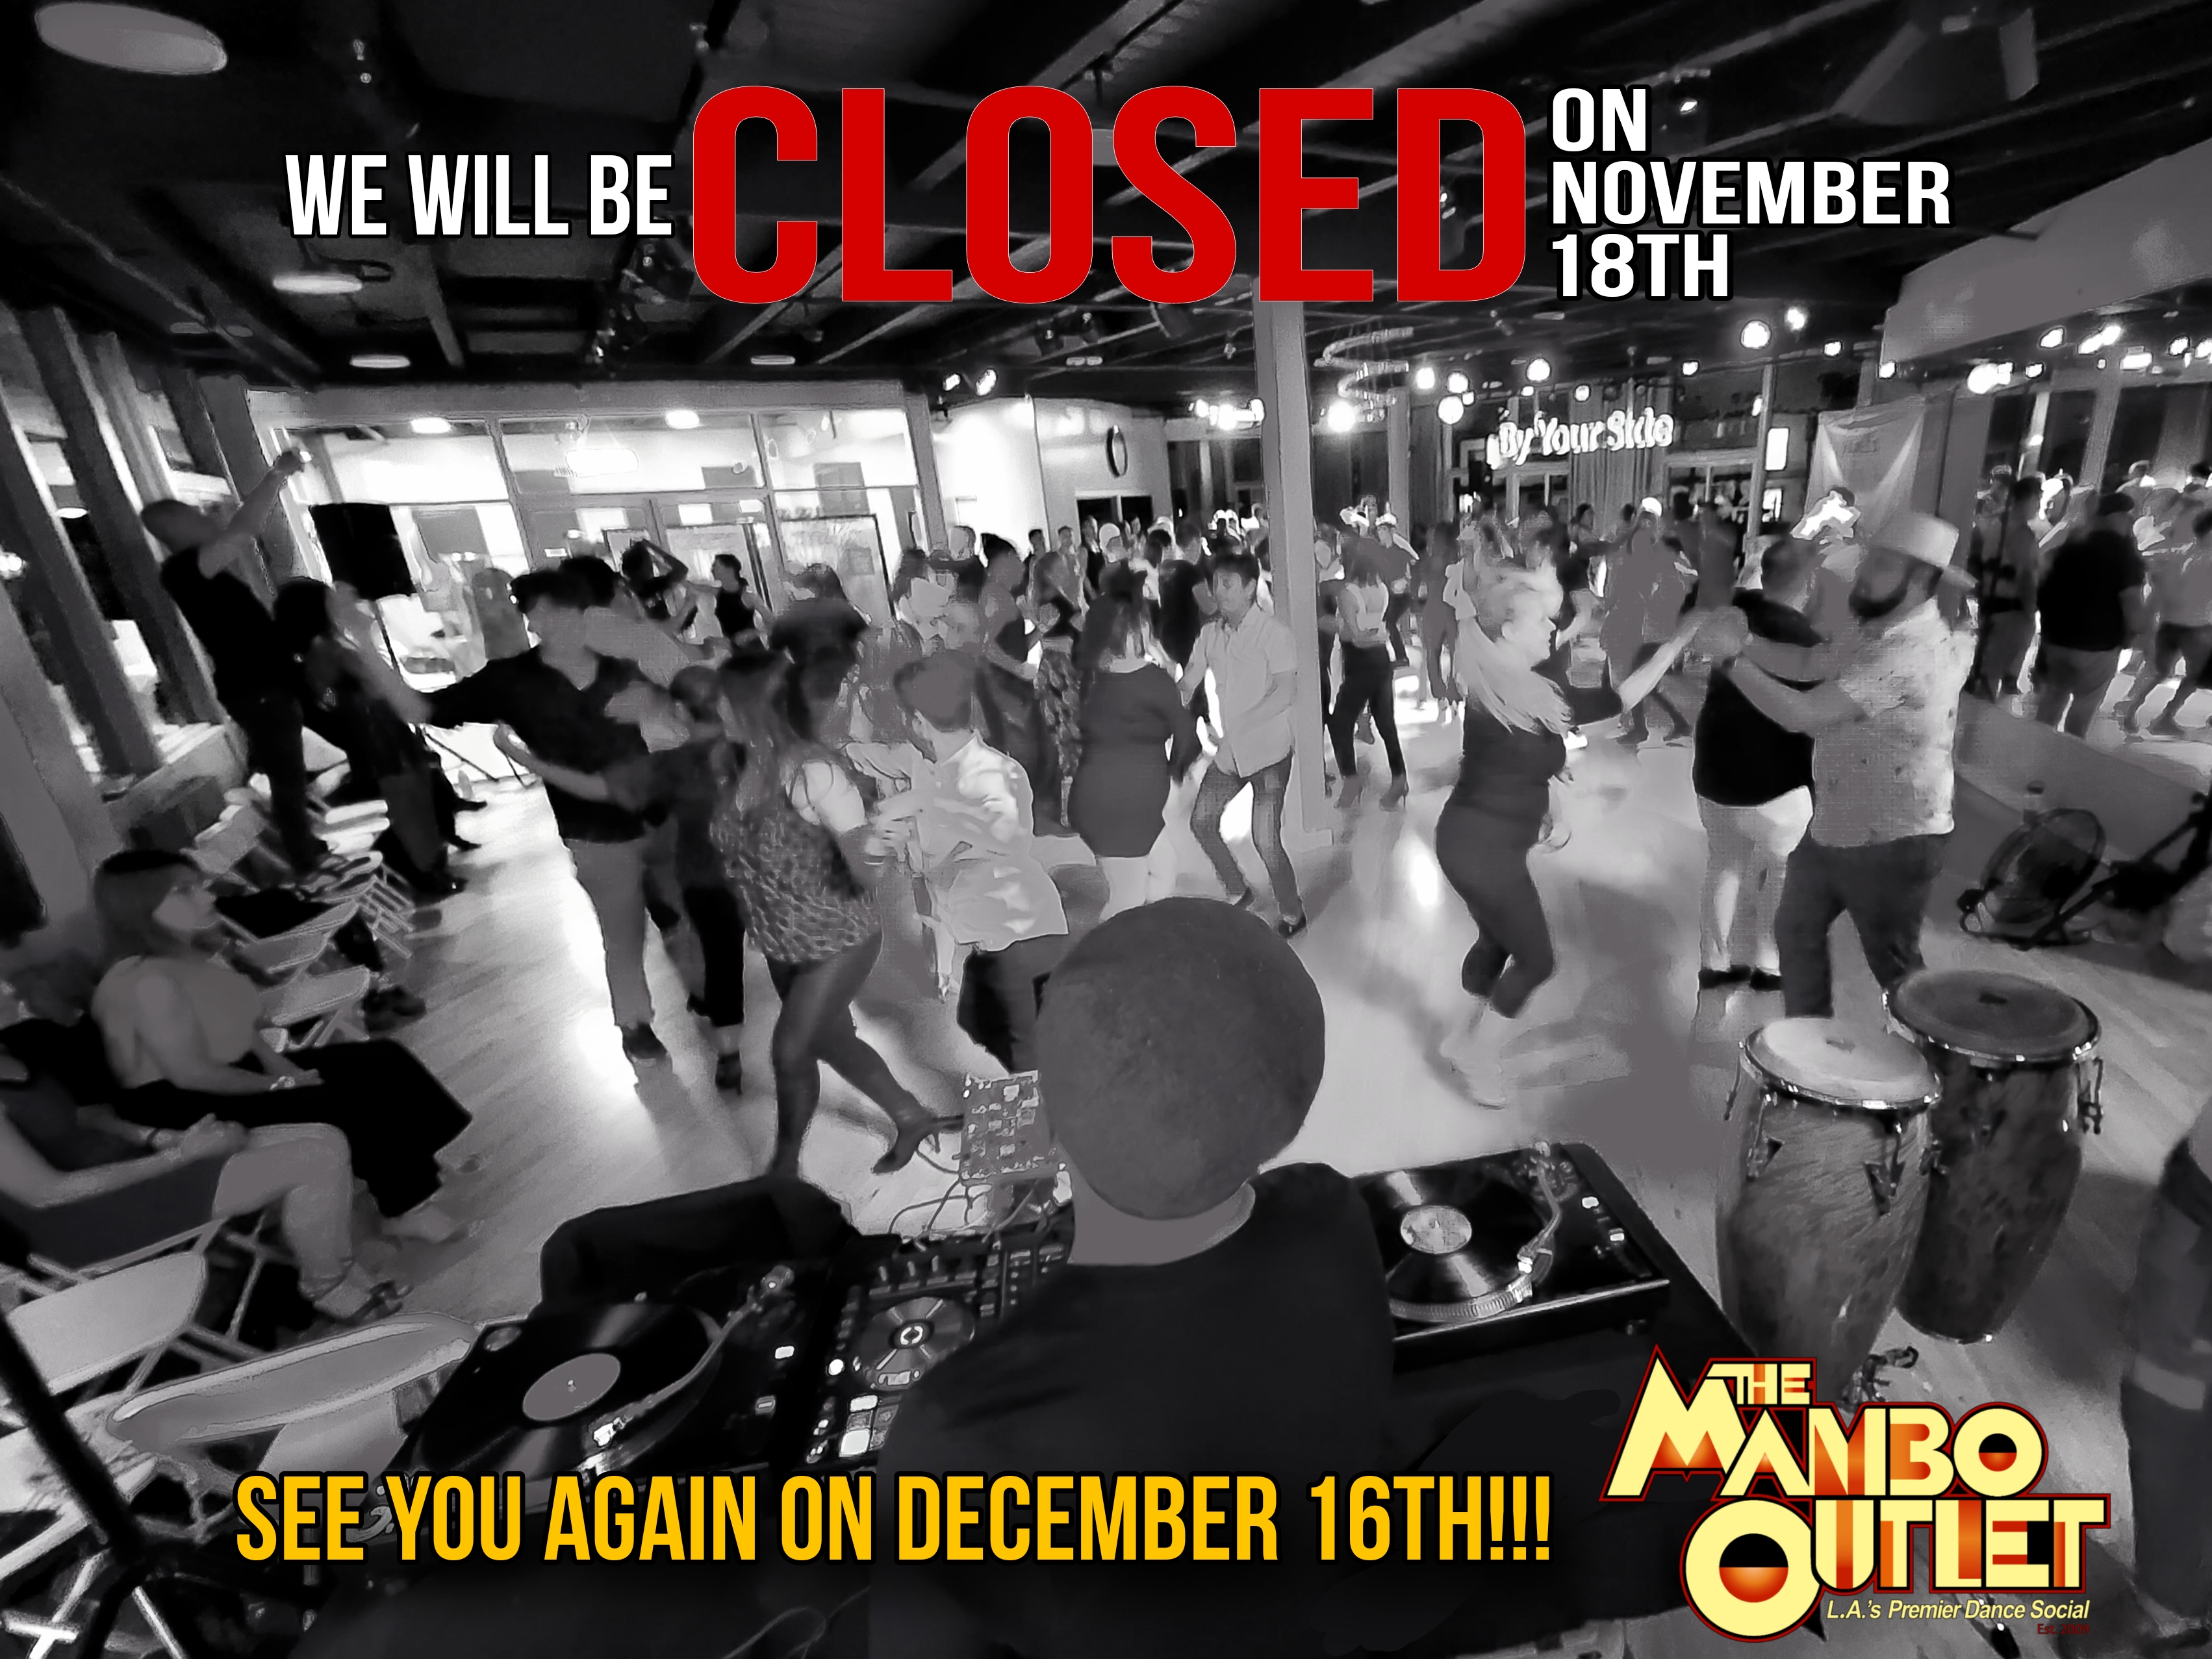 Sorry! We will be CLOSED on November 18th